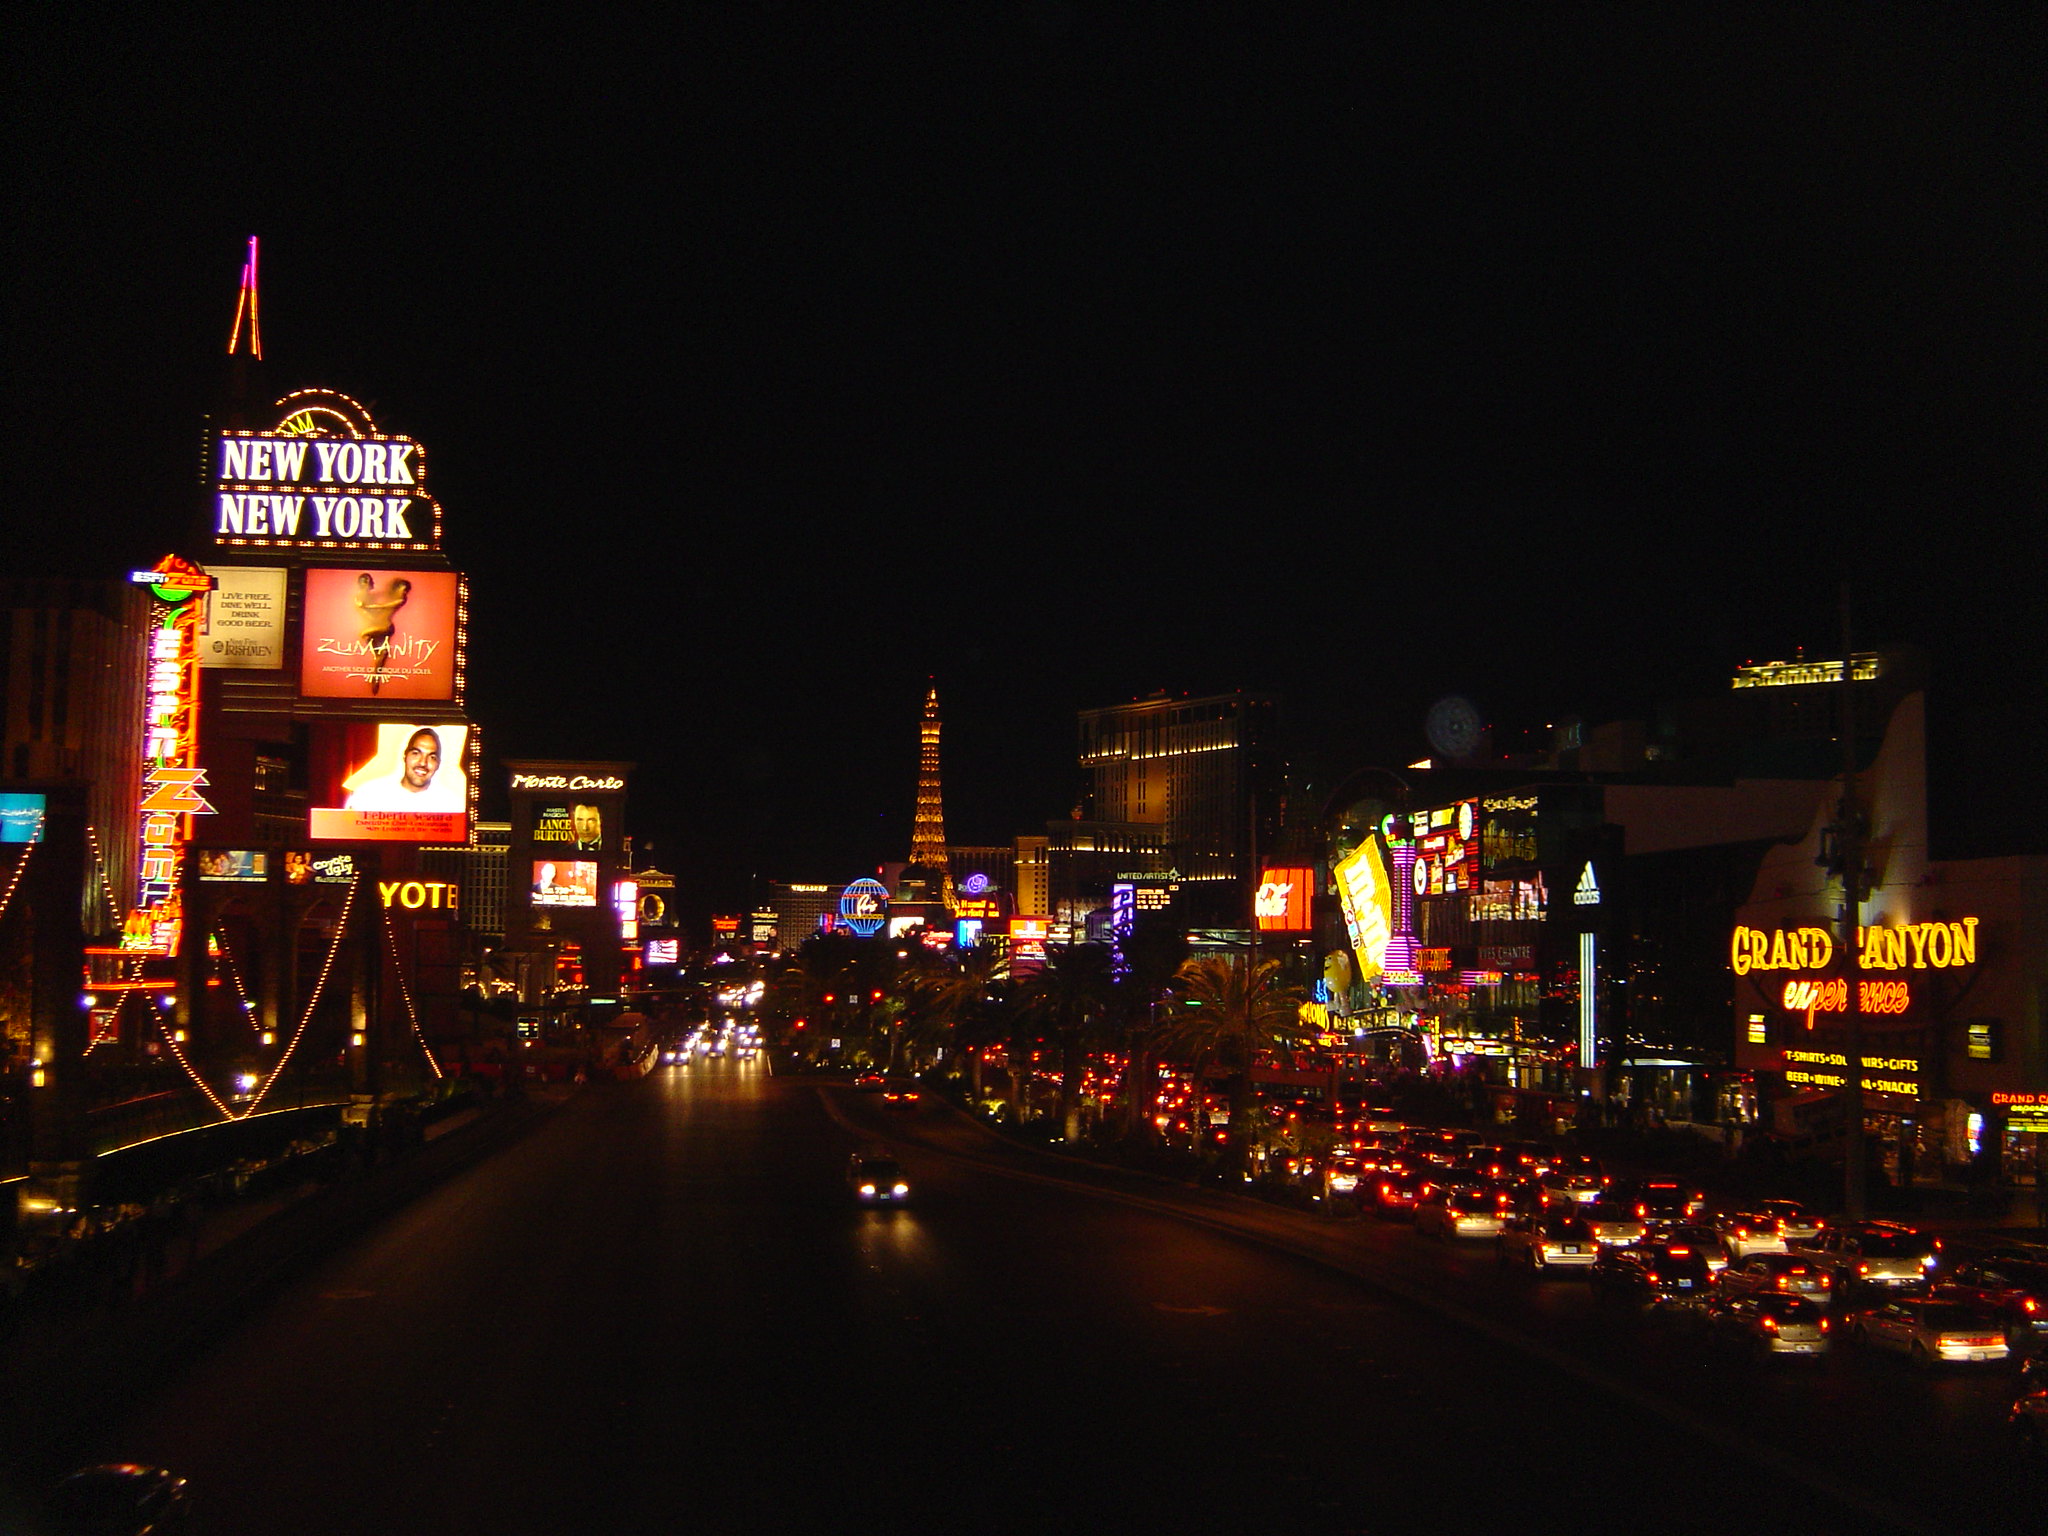 Another nighttime Las Vegas view